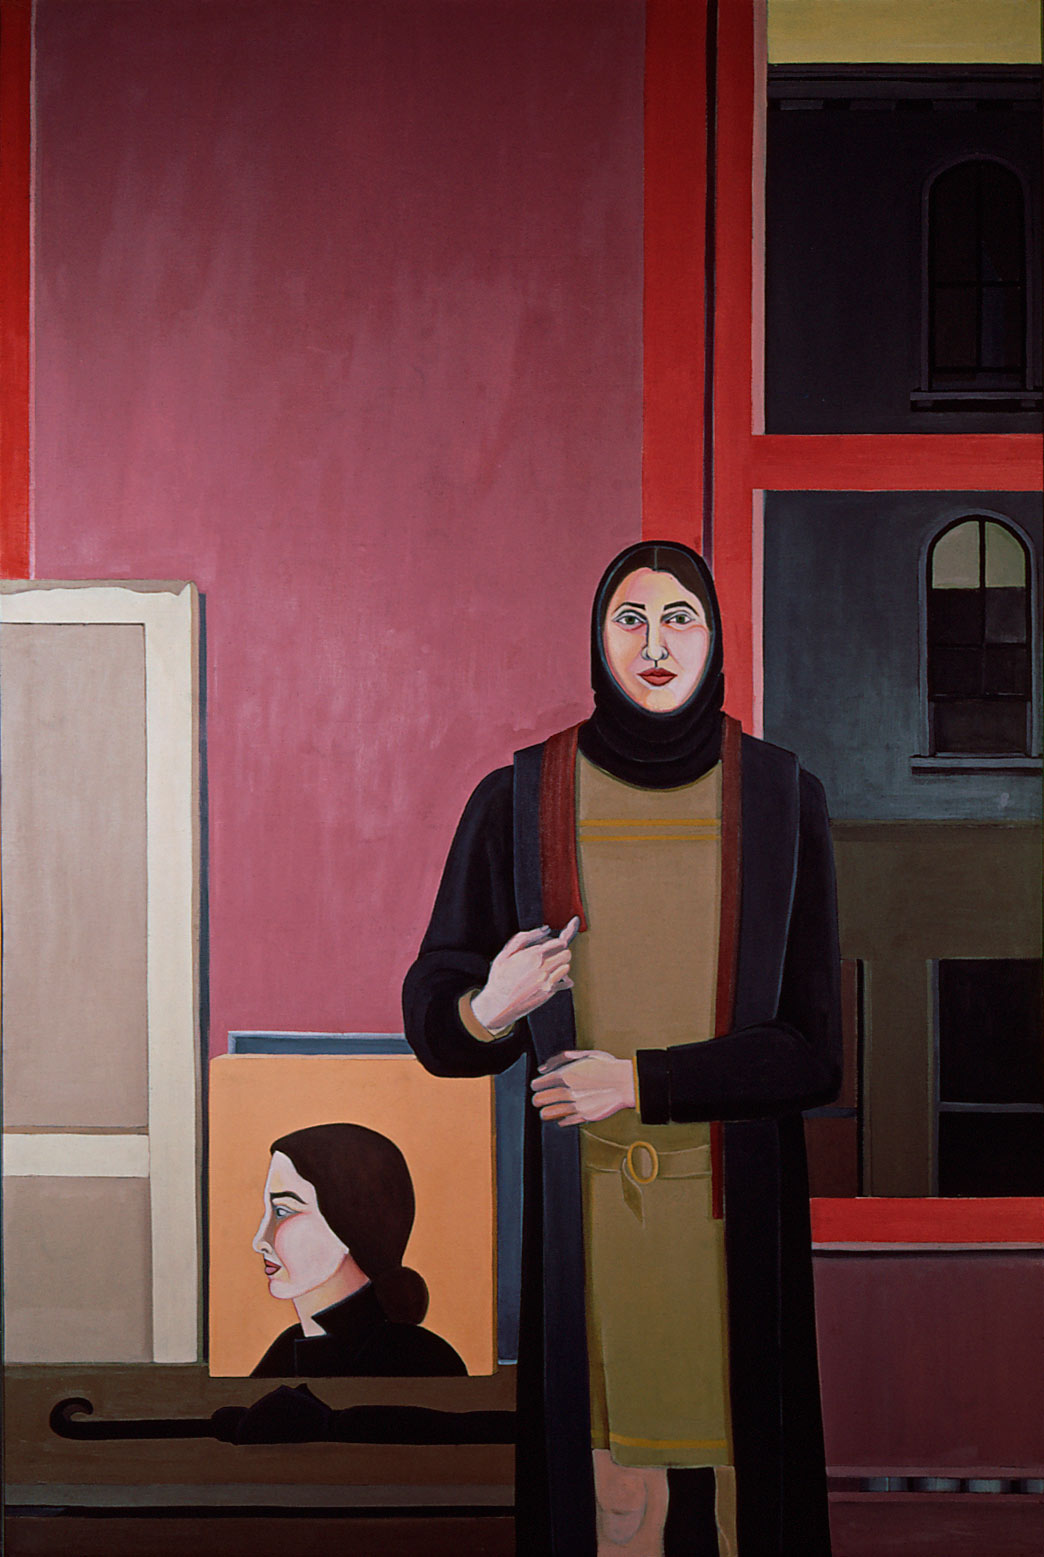 Self in New York with Profile Painting by Ethel Fisher, 1968, oil on linen, 72 x 48 inches, twentieth century figure painting.